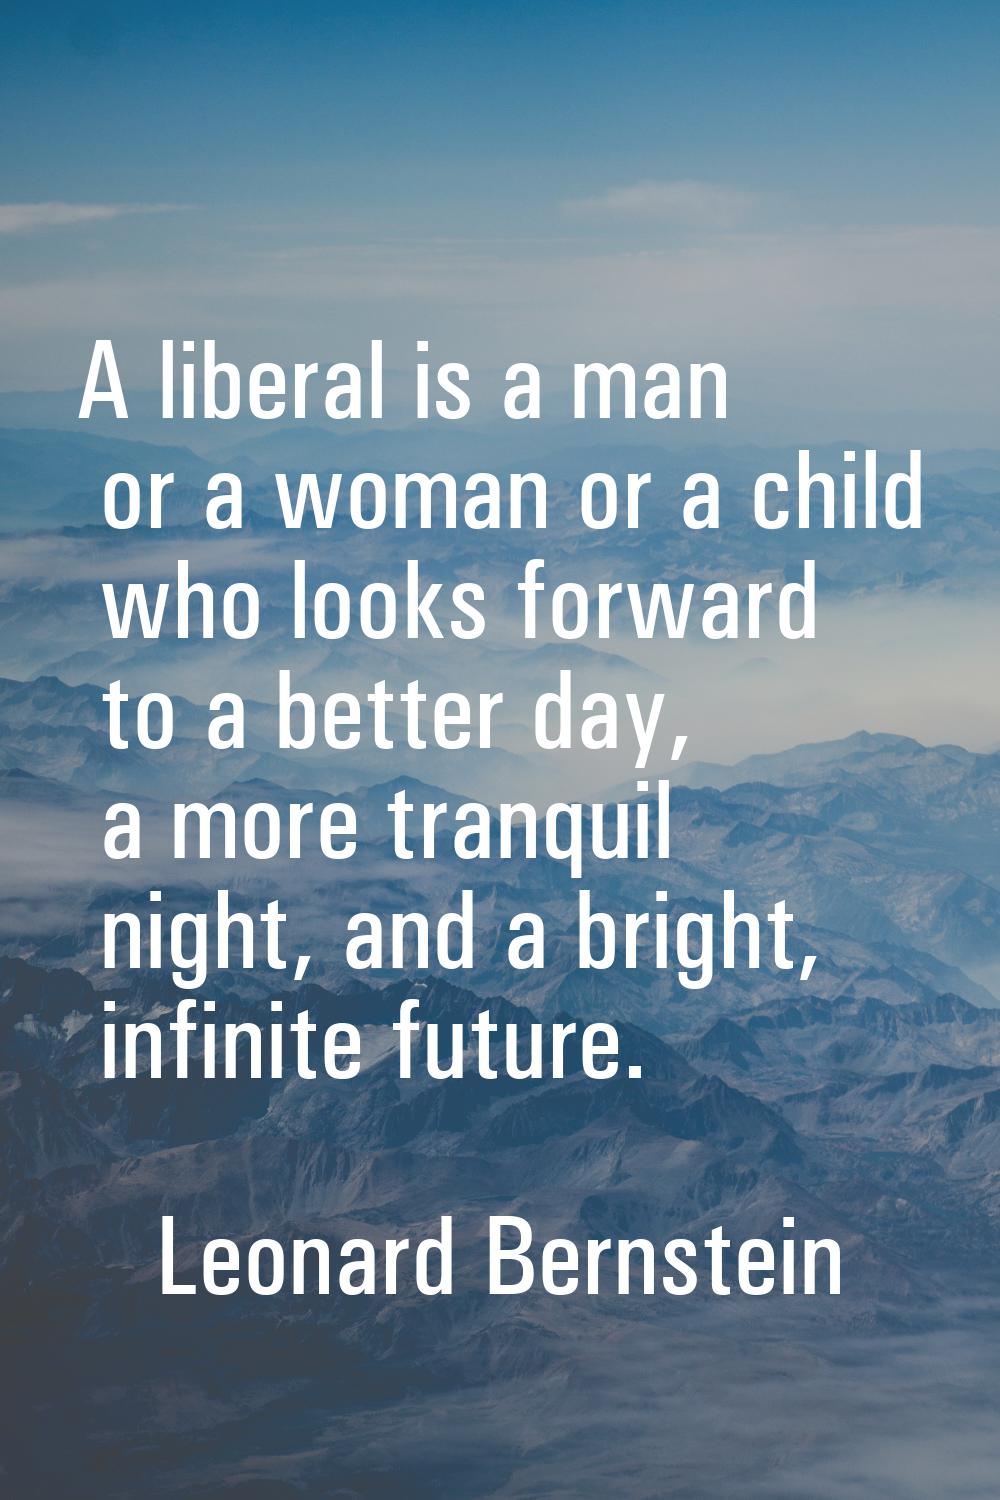 A liberal is a man or a woman or a child who looks forward to a better day, a more tranquil night, 